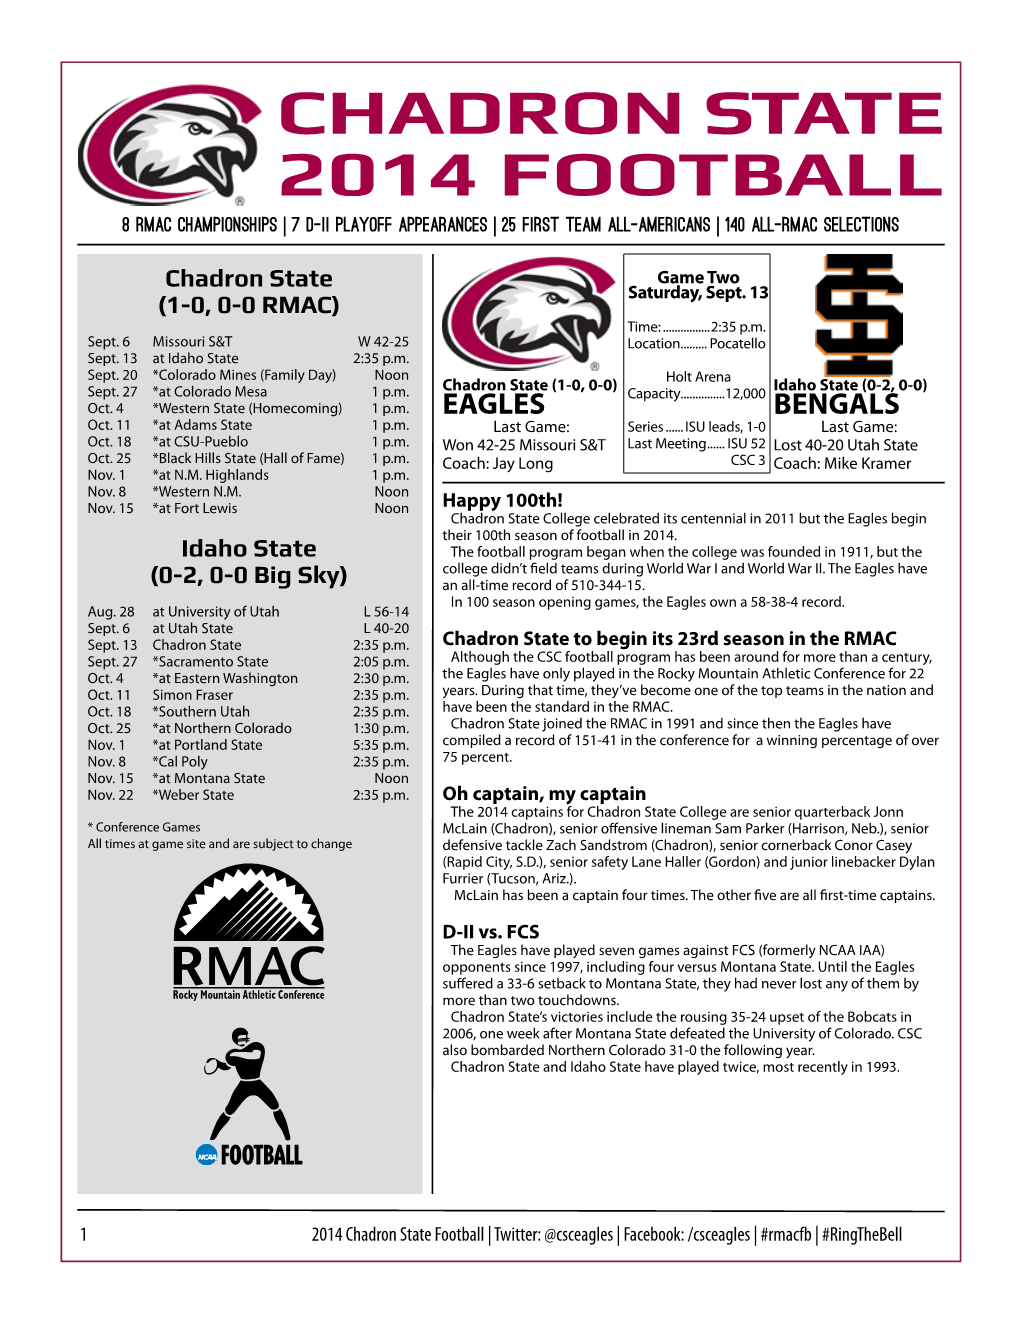 Chadron State 2014 Football 8 RMAC Championships | 7 D-II Playoff Appearances | 25 First Team All-Americans | 140 All-RMAC Selections